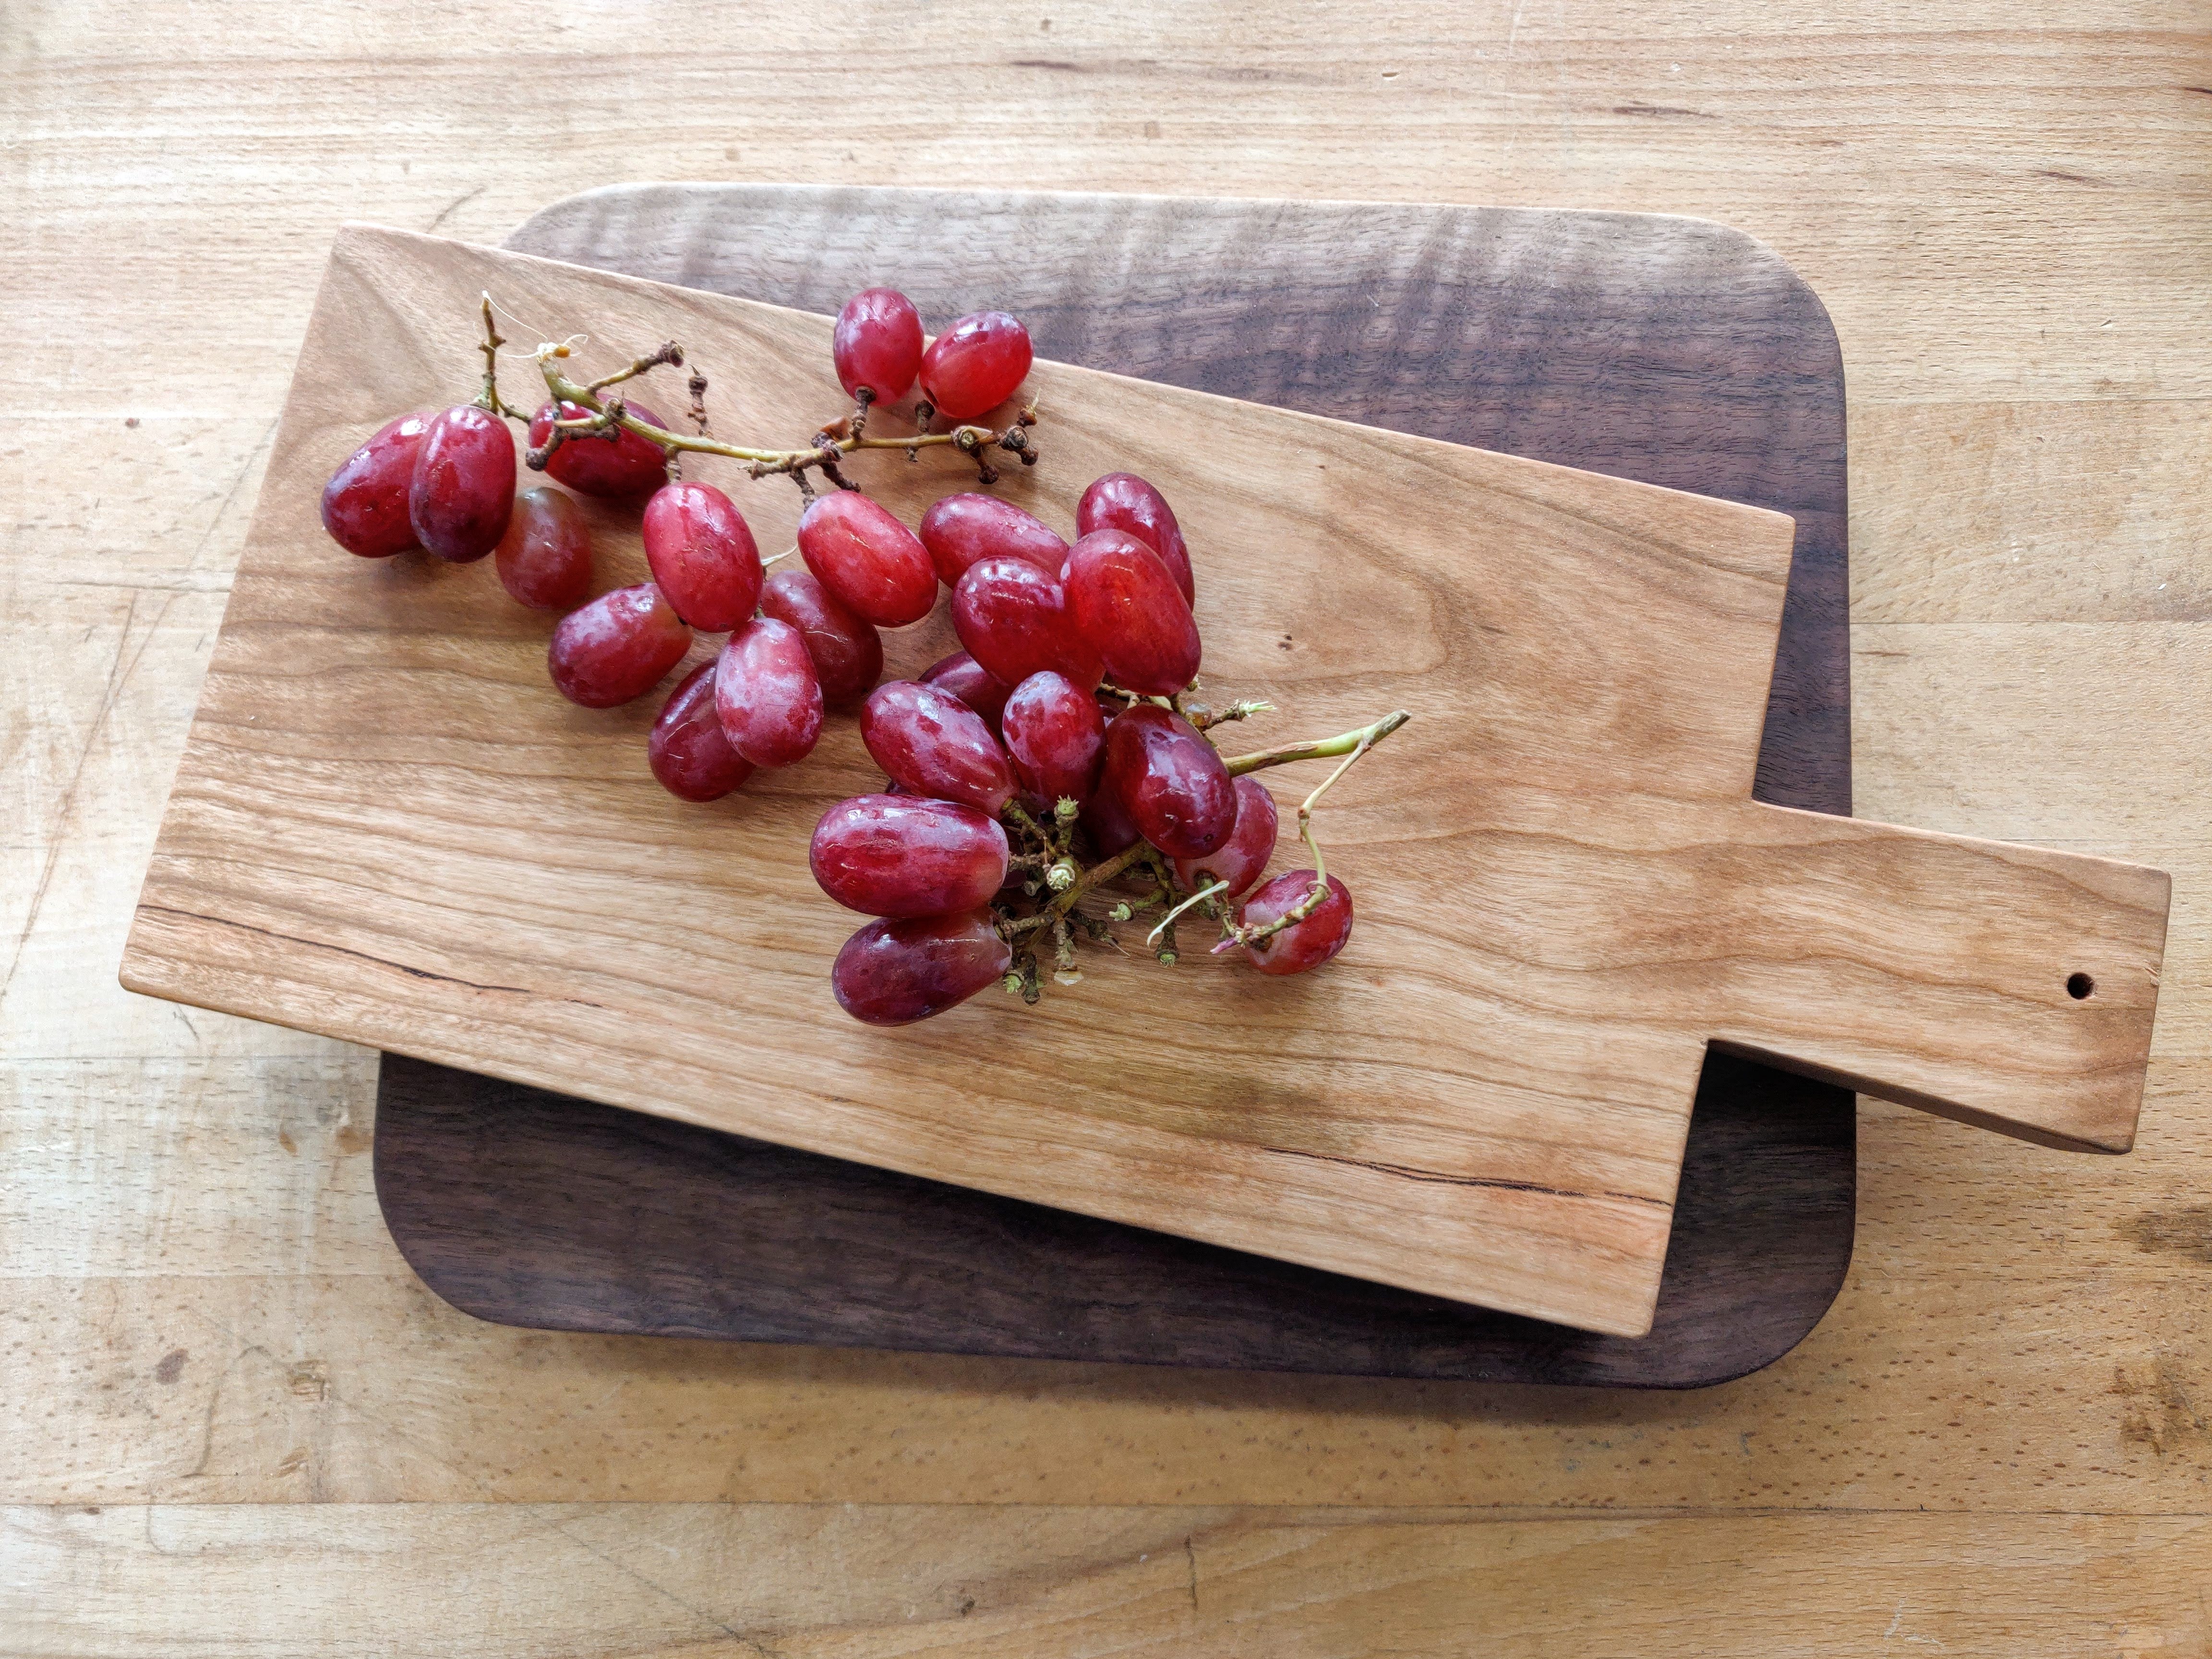 Two bunches of red grapes lay on a stack of handmade cutting boards